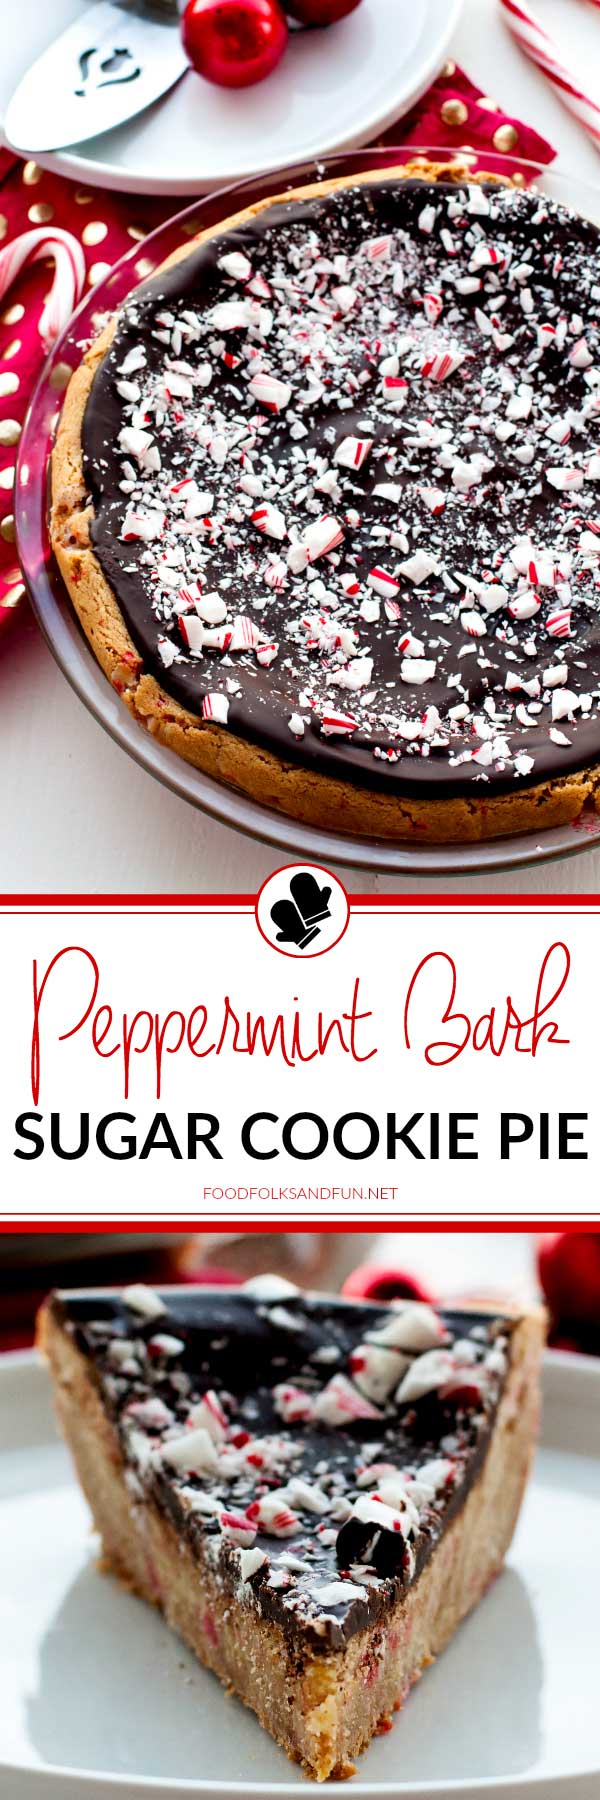 This Peppermint Bark Sugar Cookie Pie is a delicious, festive dessert that is perfect for holiday entertaining and SO easy to make. Peppermint, dark chocolate, and sugar cookie-how could you go wrong?!  via @foodfolksandfun